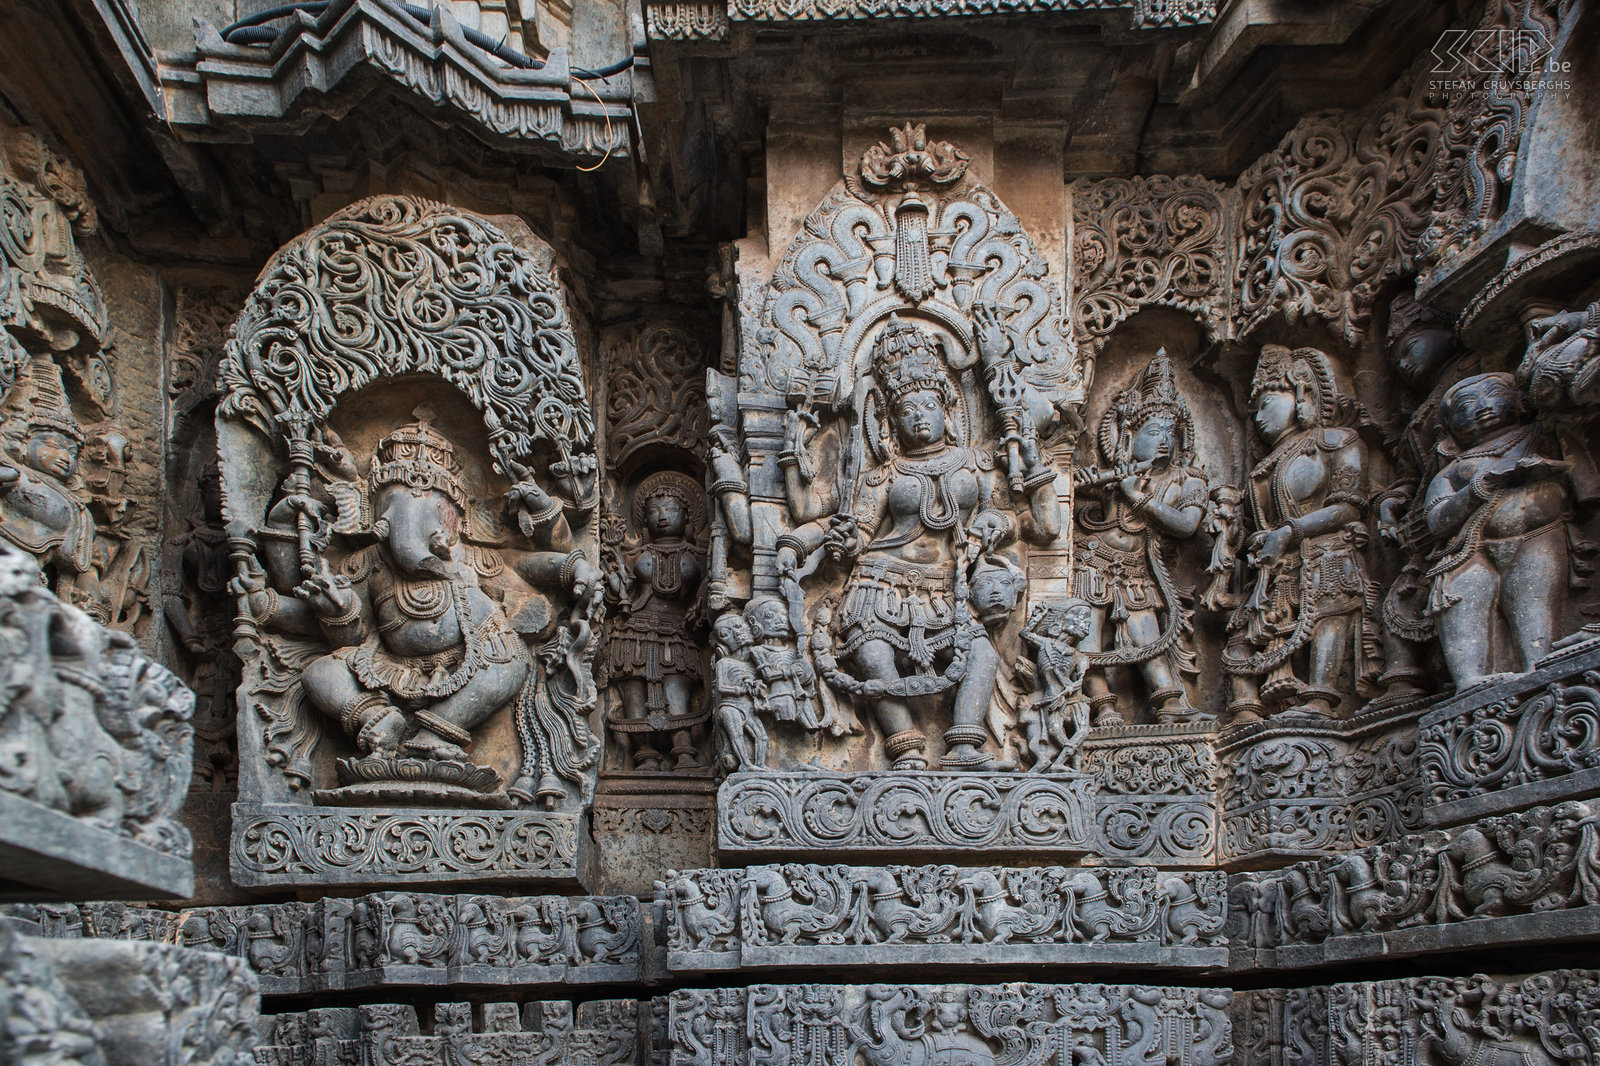 Halebidu The walls of the Hoysala temple in Halebidu are covered with an endless variety of depictions from Hindu mythology, animals and dancing figures.  Stefan Cruysberghs